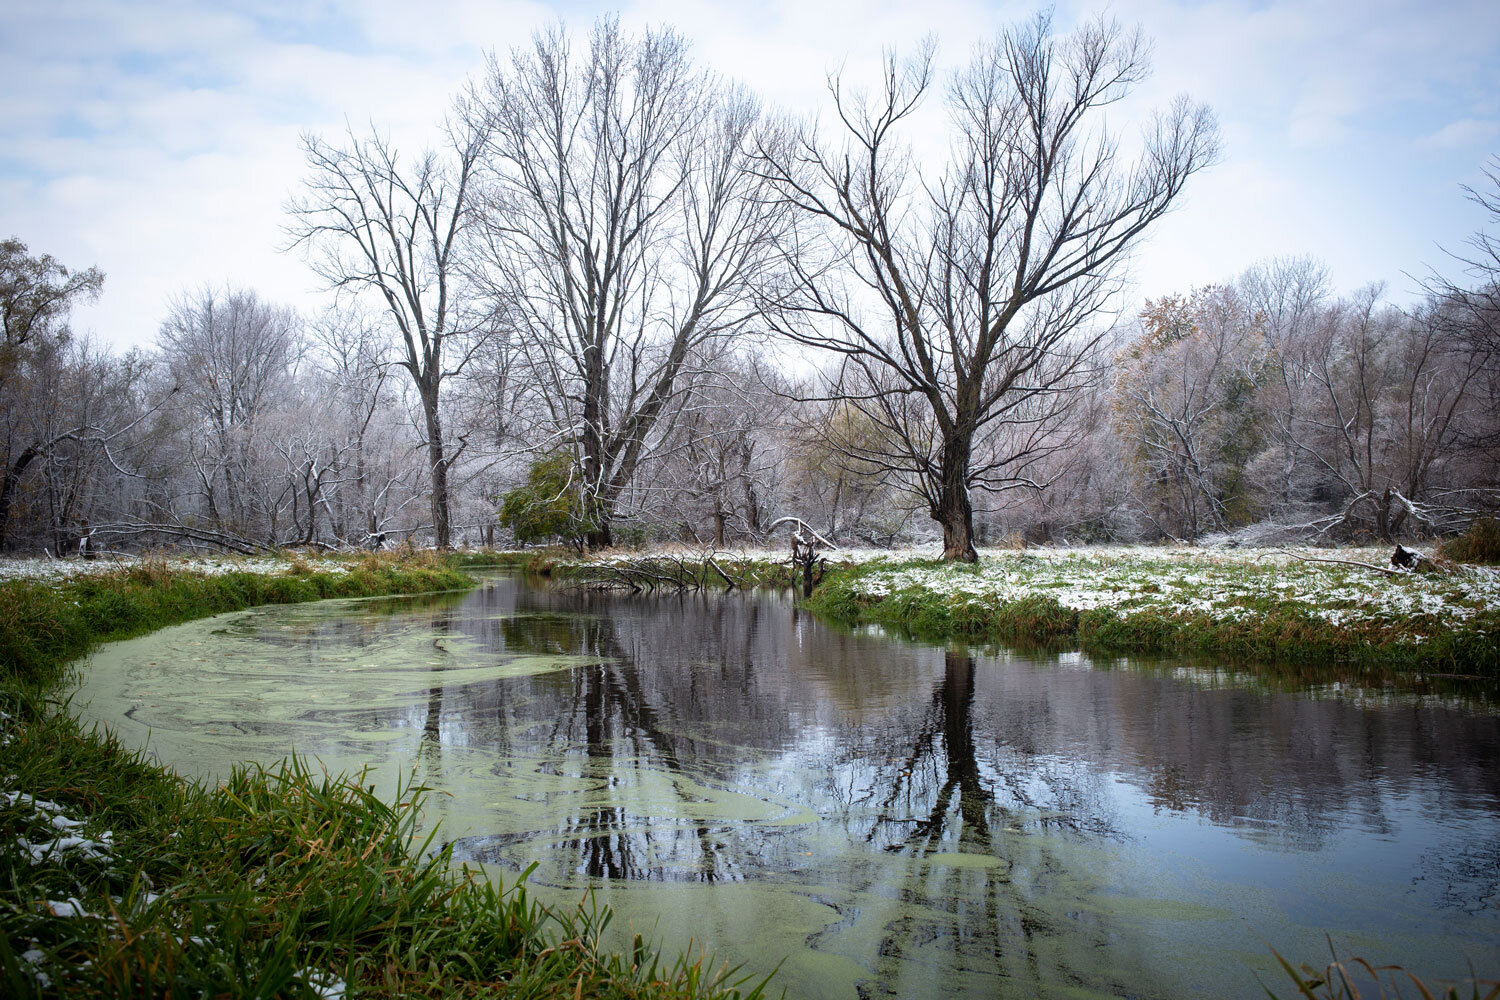  Polecat Creek near Lake Springfield flows through a snow-speckled landscape Friday, Nov. 9, 2018, in Springfield, Ill. [Rich Saal/The State Journal-Register] 